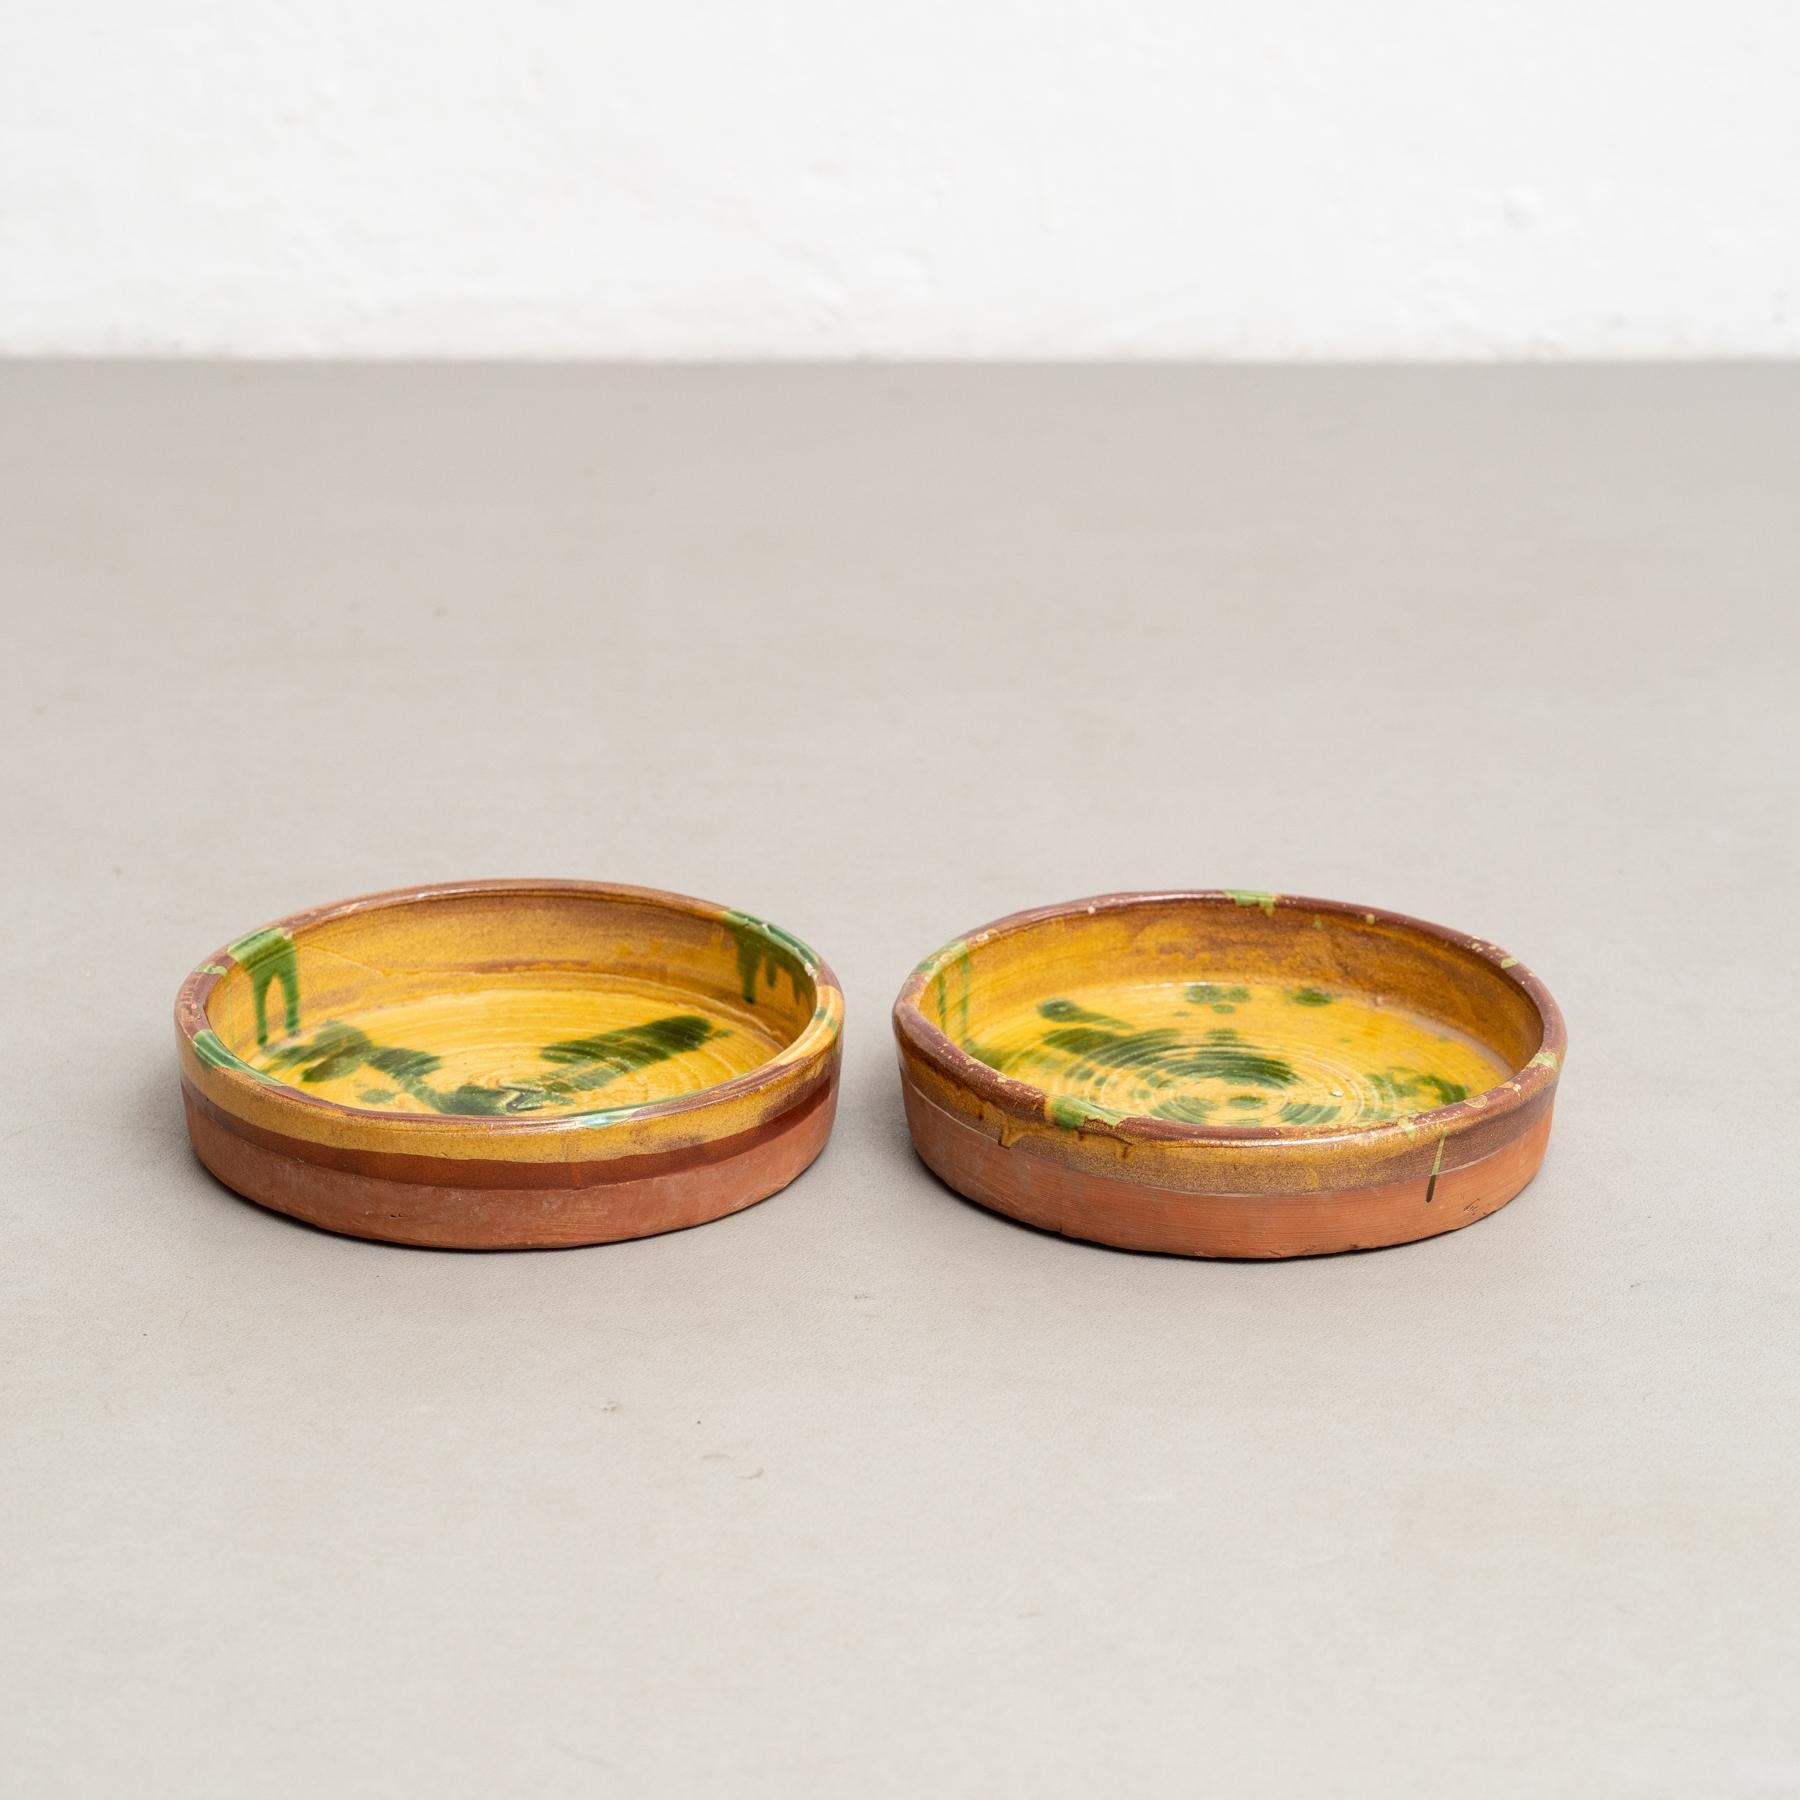 Set of two Early 20th century hand painted rustic popular traditional ceramic.
By unknown artisan, France.
In original condition, with minor wear consistent with age and use, preserving a beautiful patina.

Materials:
Ceramic

